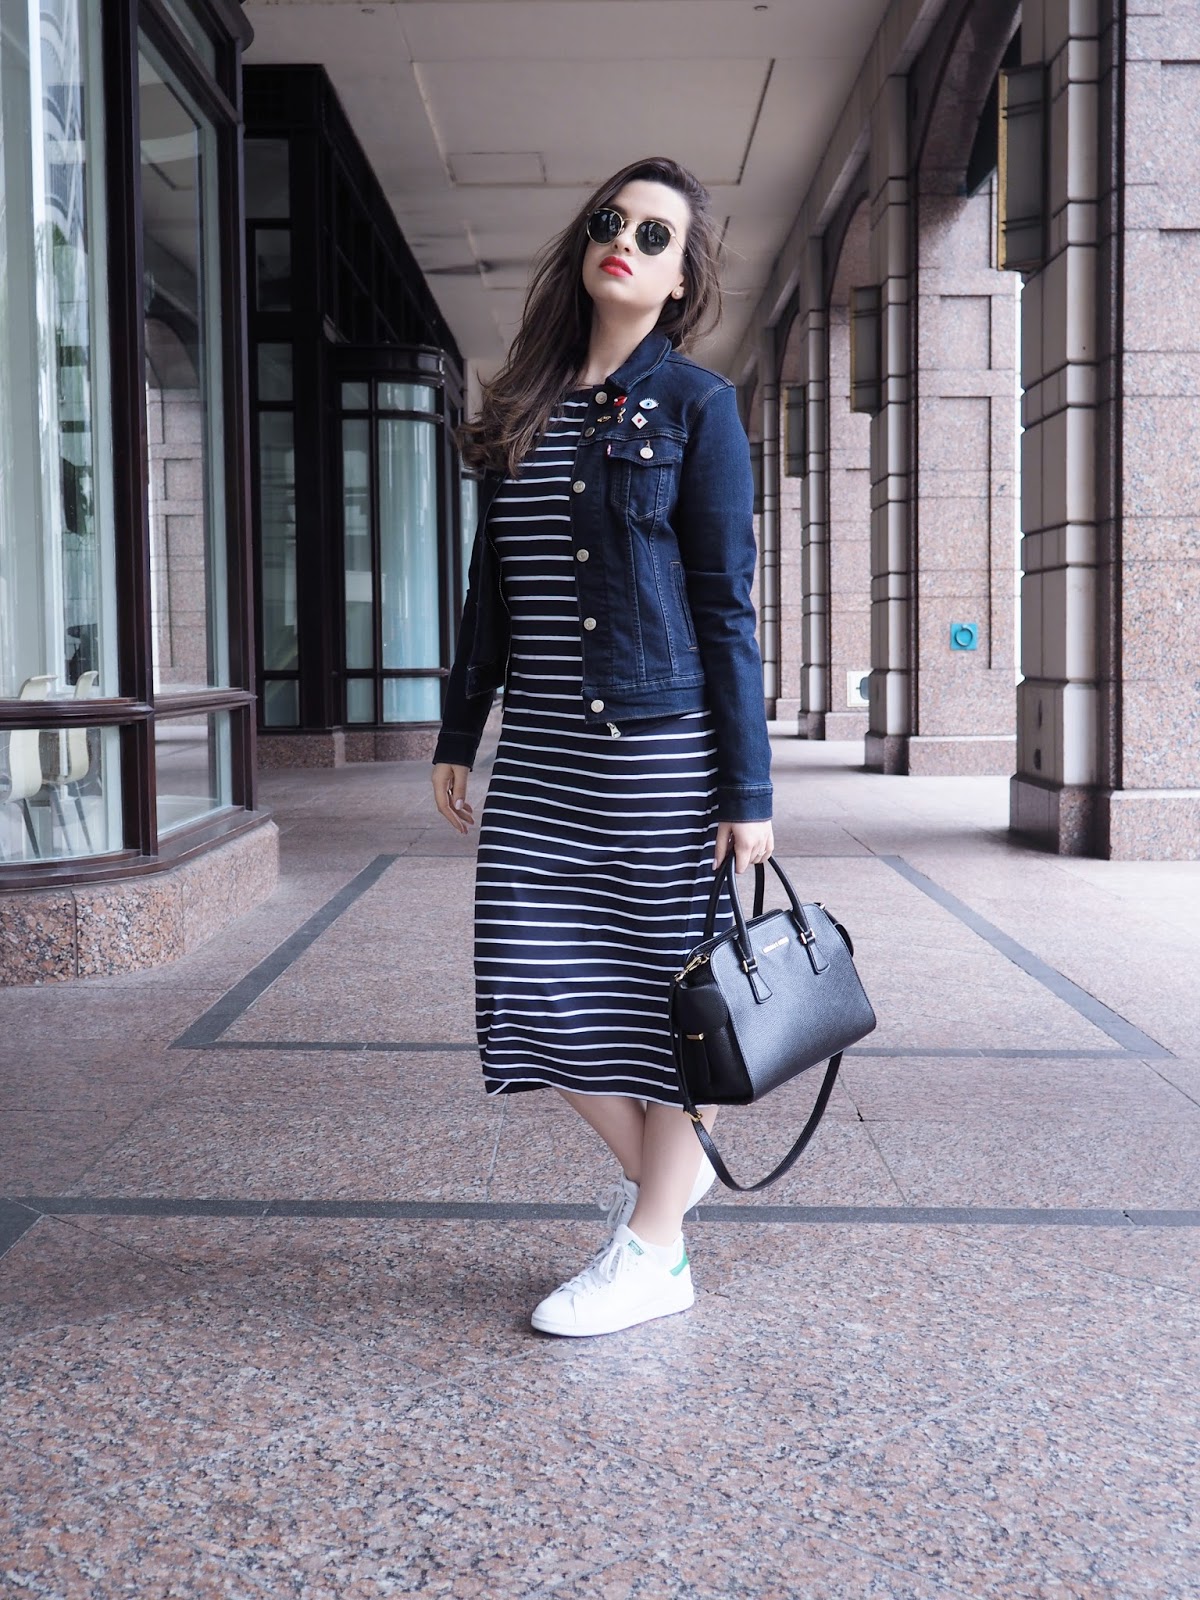 White Shirtdress with Sneakers Outfits (7 ideas & outfits) | Lookastic